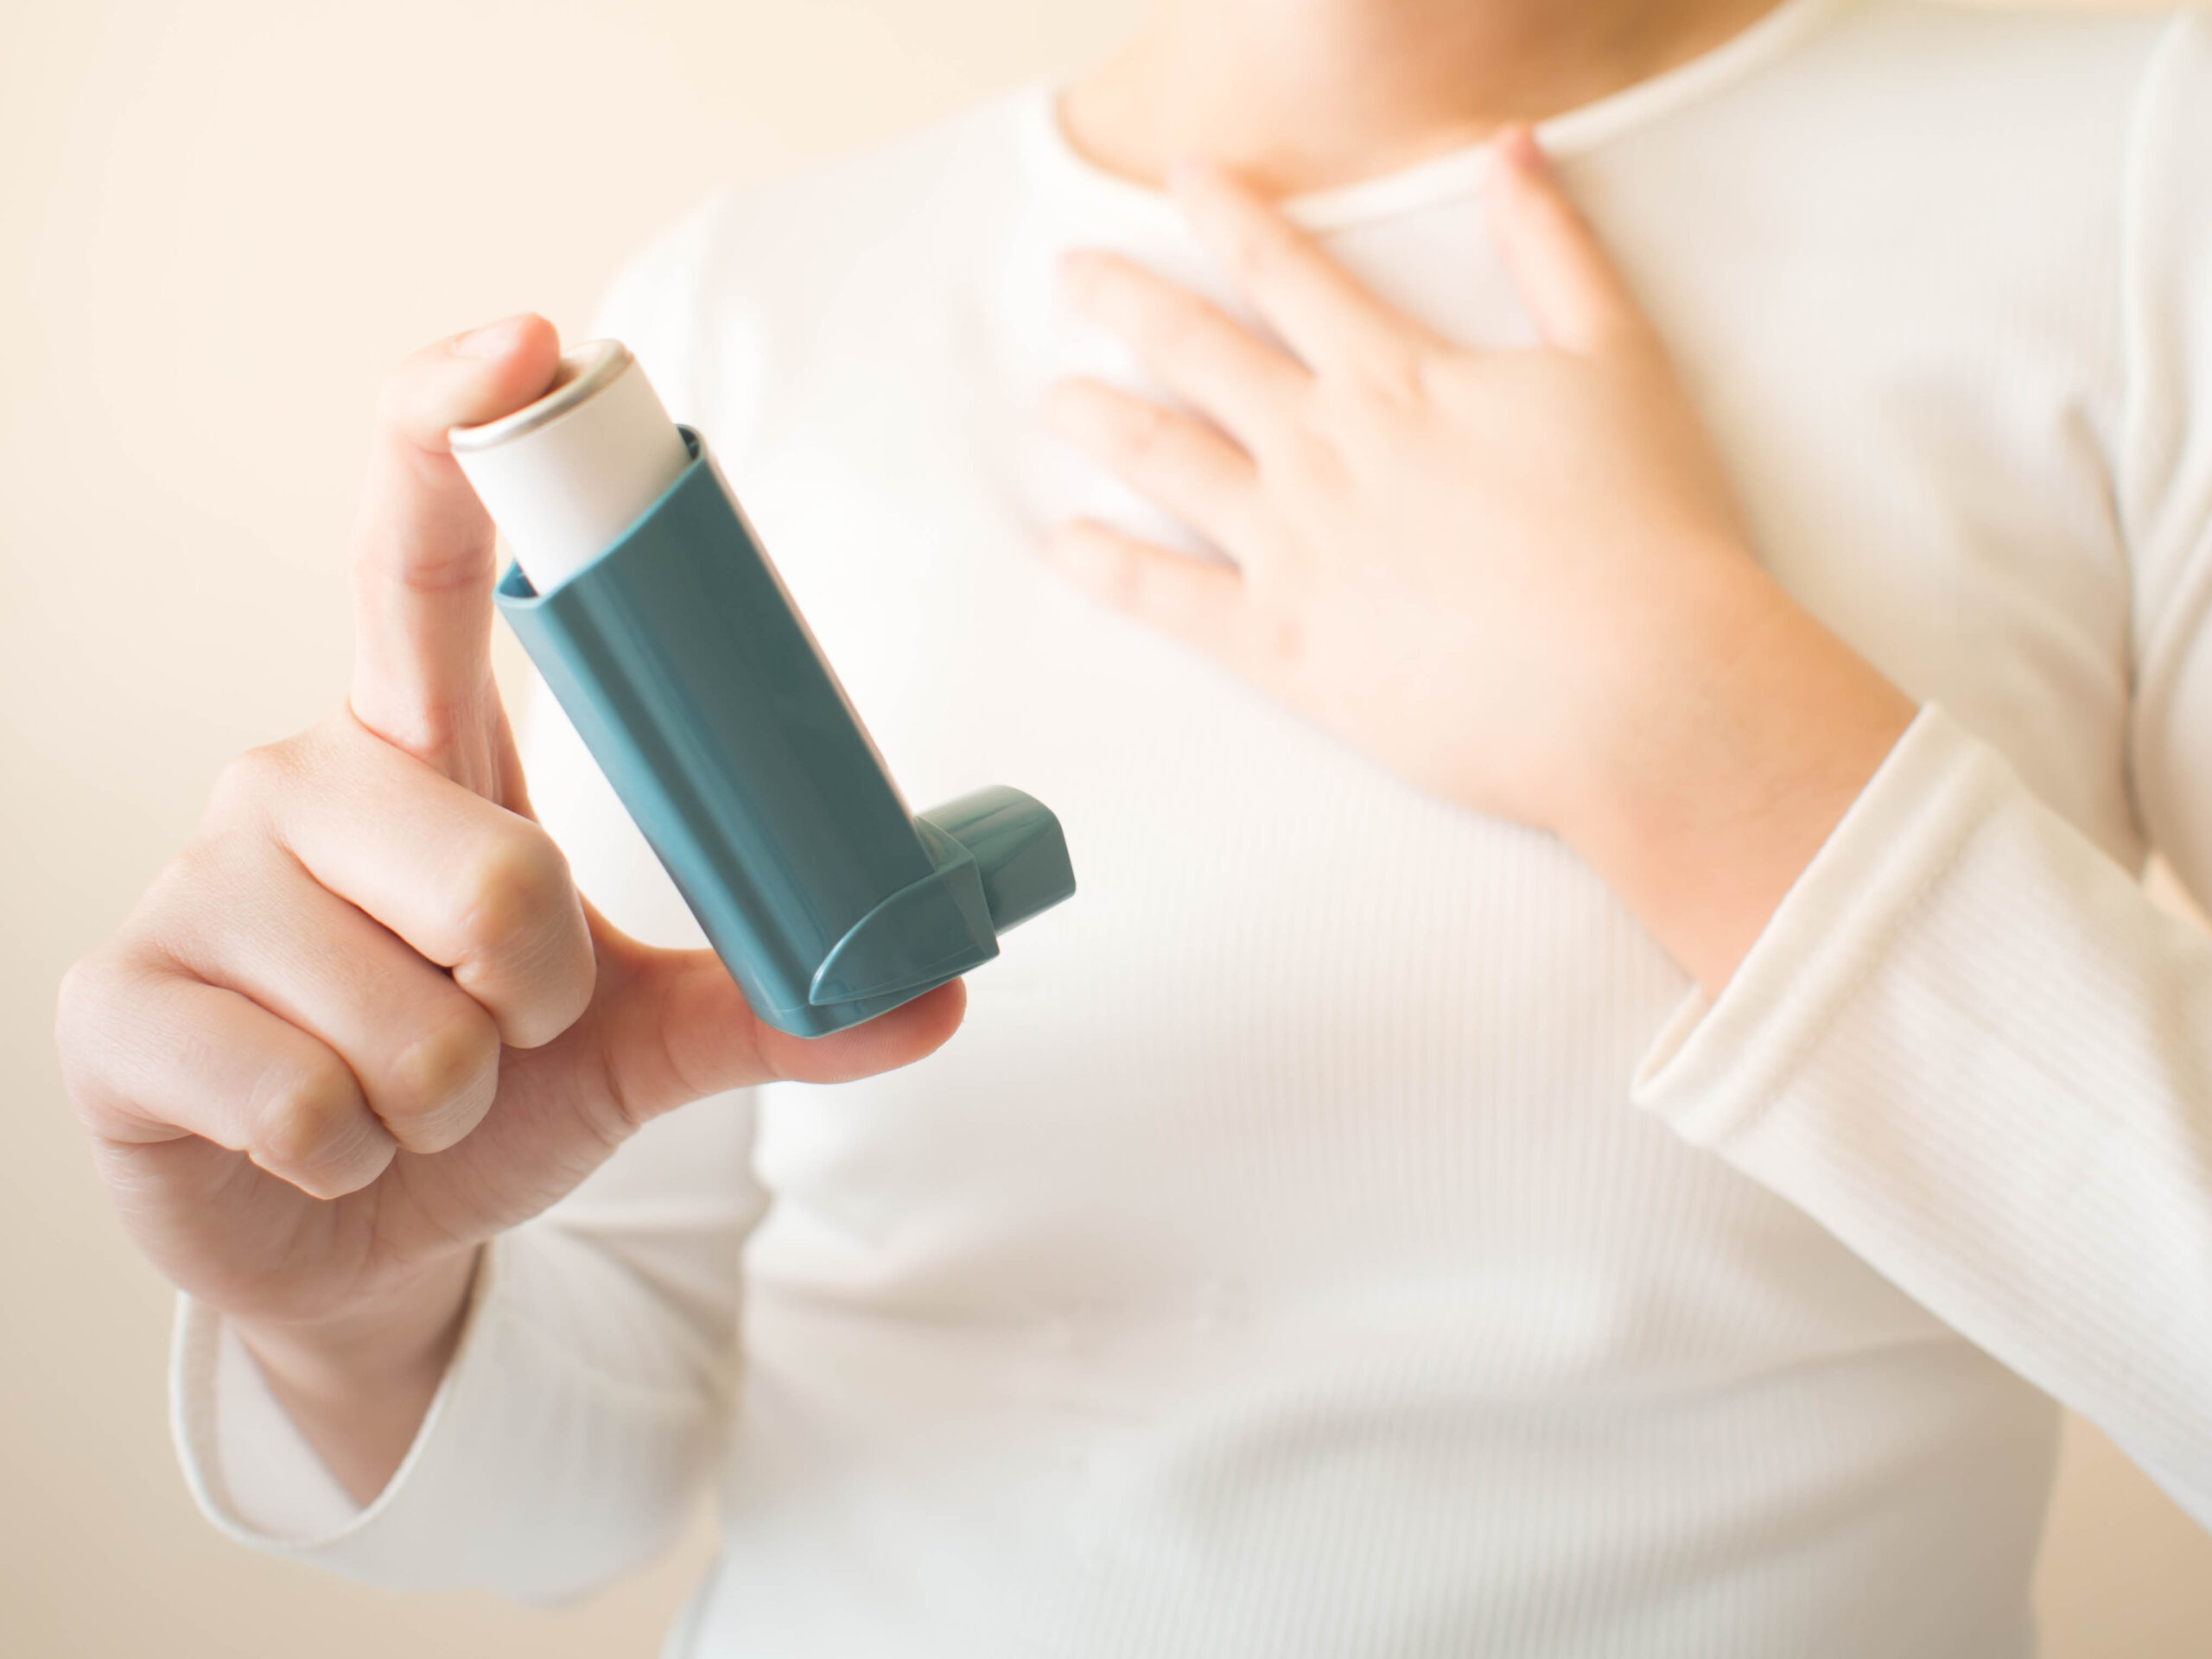 Person holding asthma inhaler to relieve asthma attack